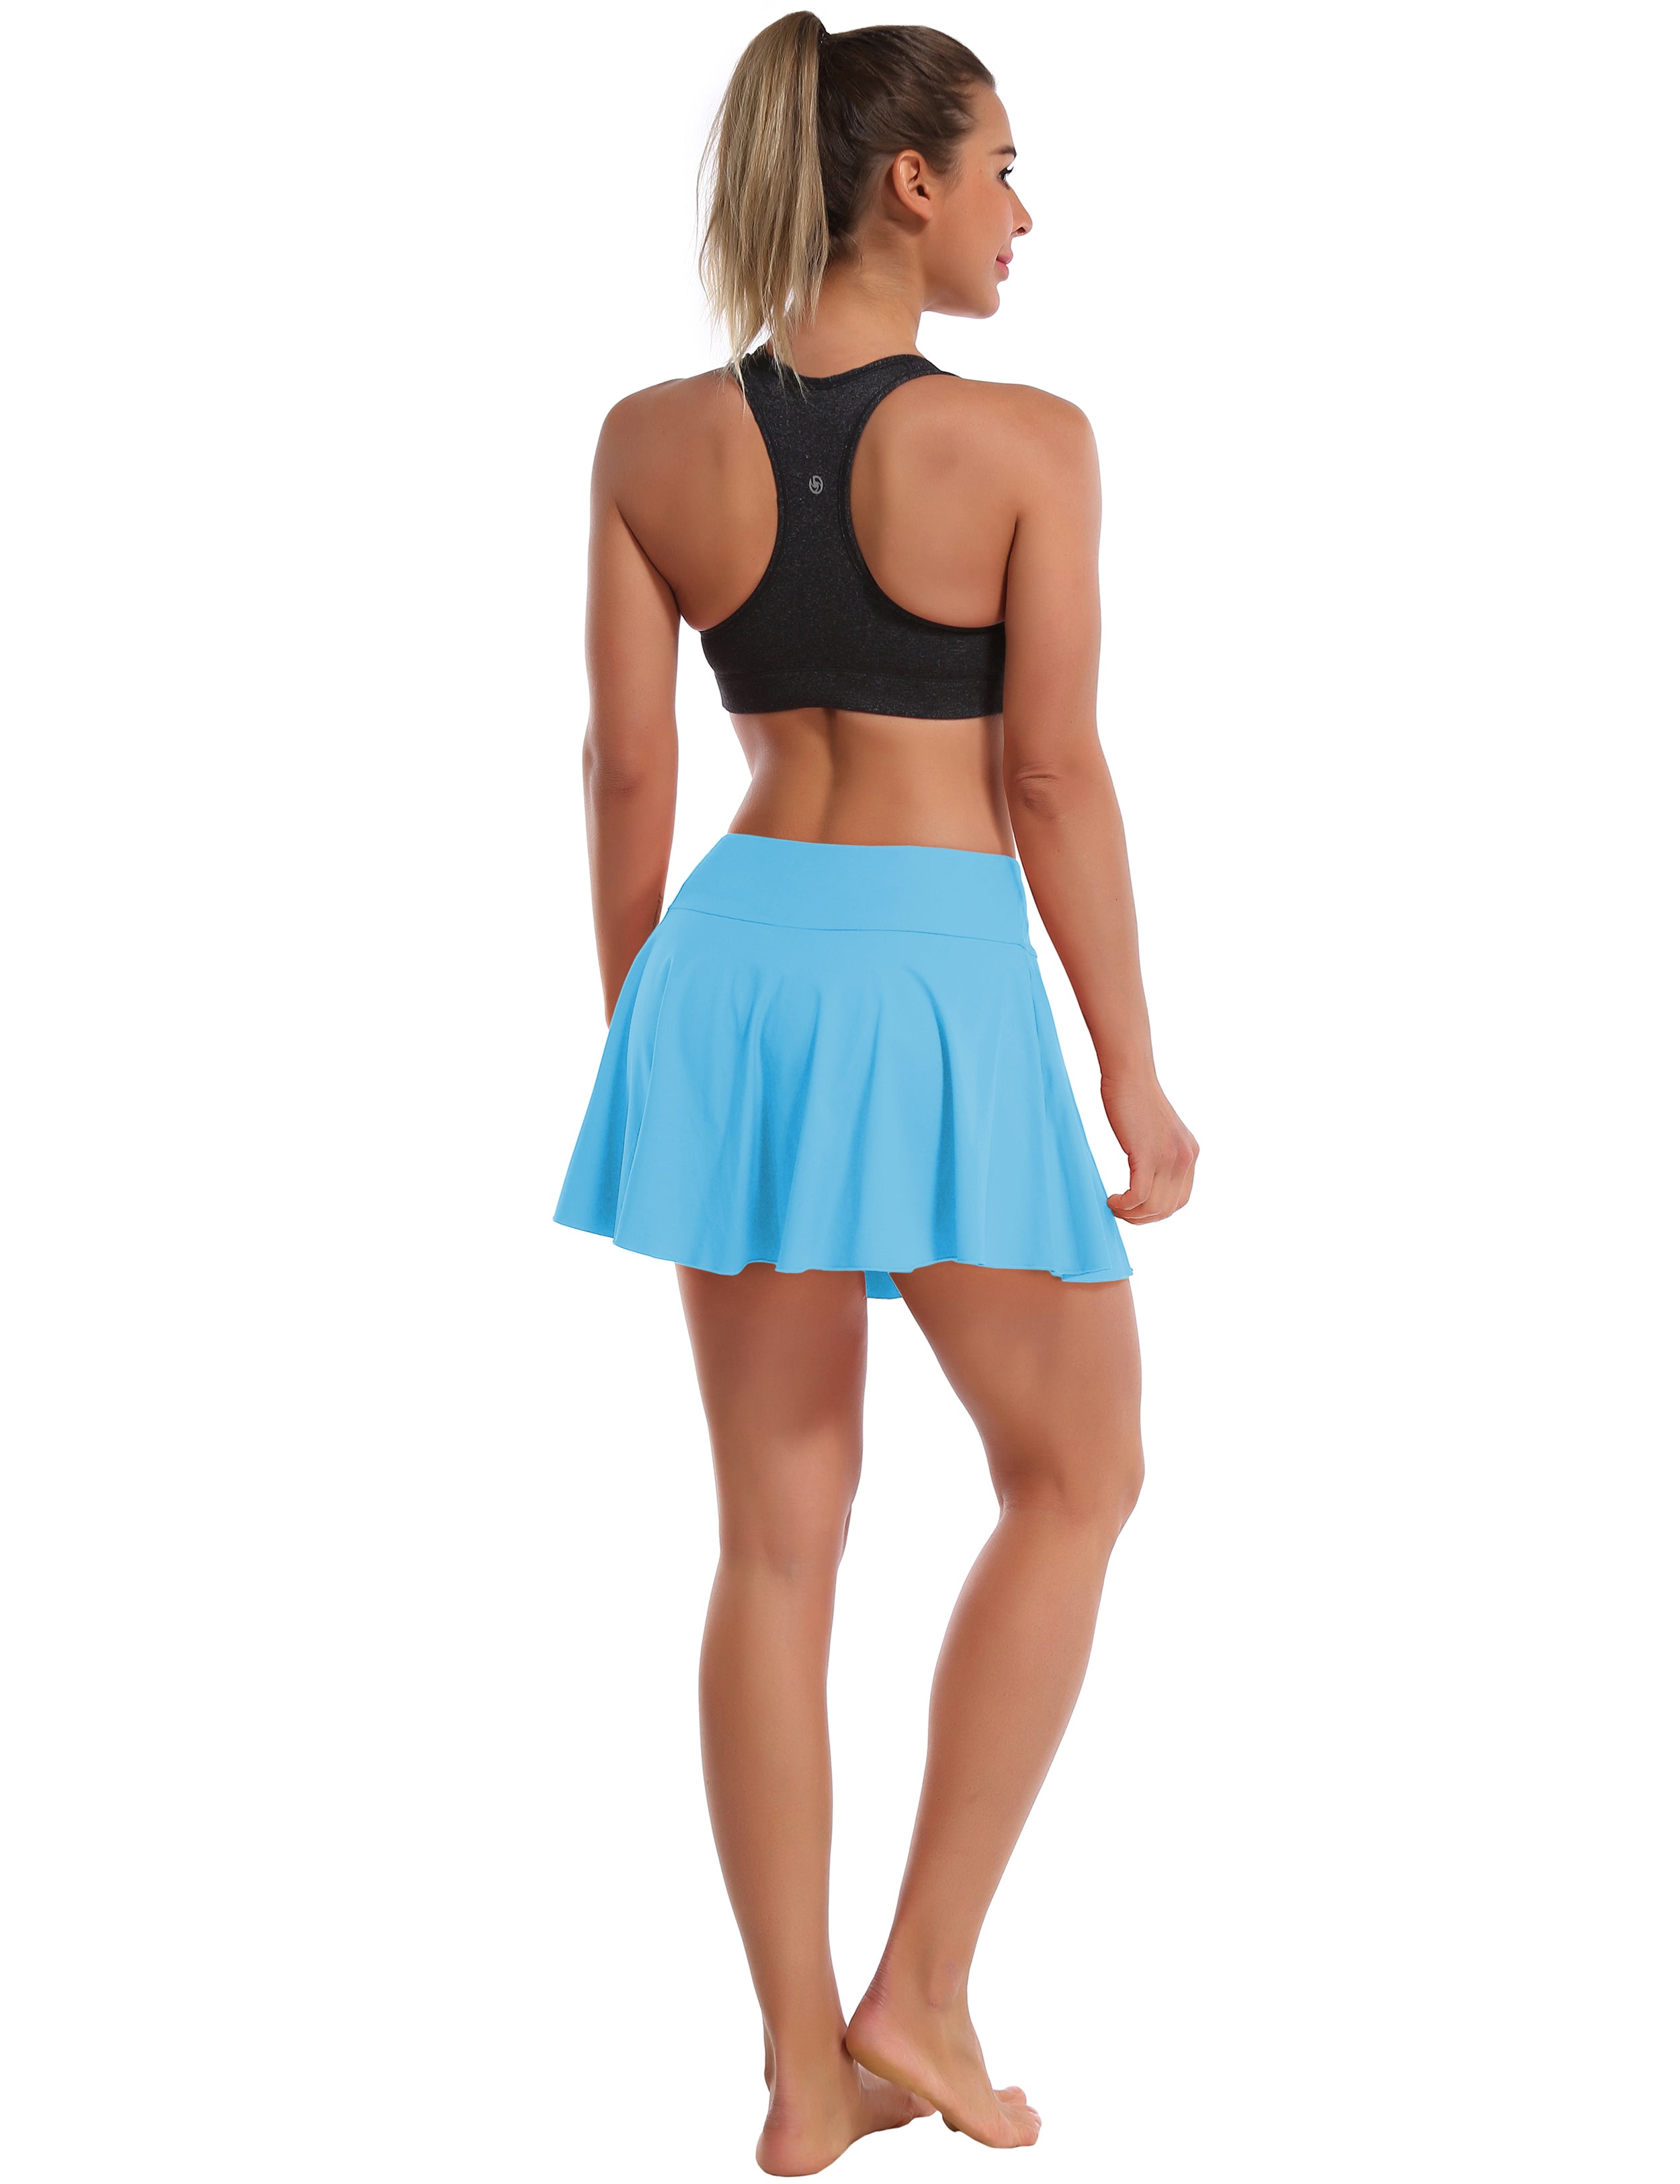 Athletic Tennis Golf Pleated Skort Awith Pocket Shorts blue 80%Nylon/20%Spandex UPF 50+ sun protection Elastic closure Lightweight, Wrinkle Moisture wicking Quick drying Secure & comfortable two layer Hidden pocket